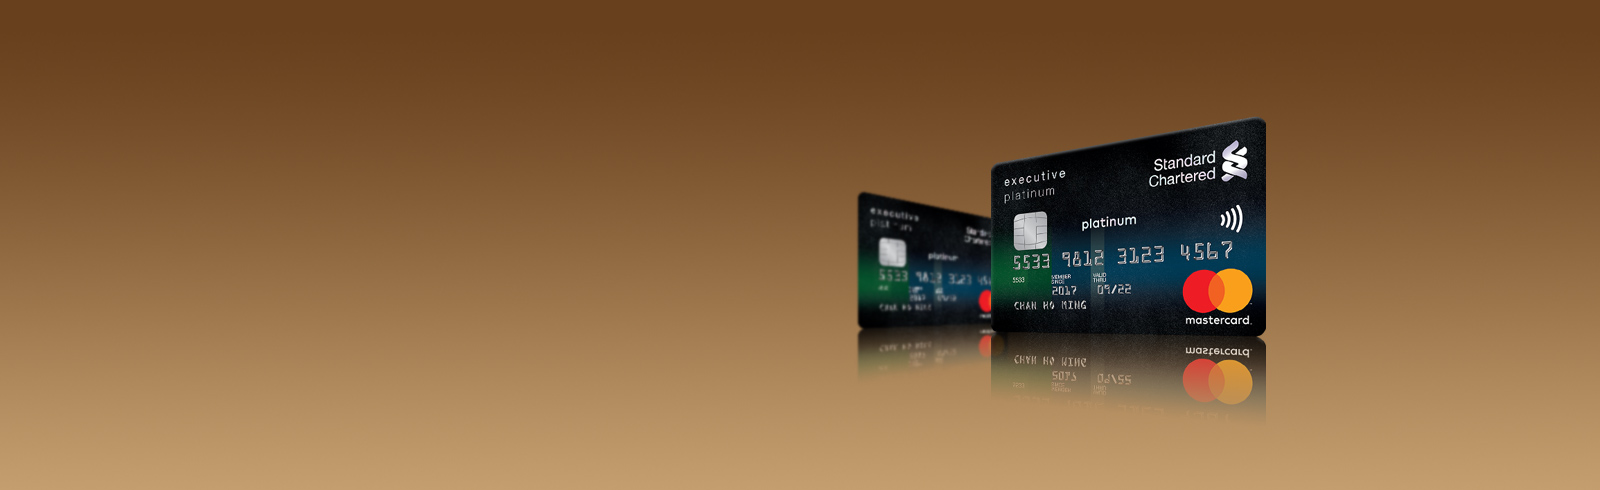 Attachment standard chartered executive credit card engchi 